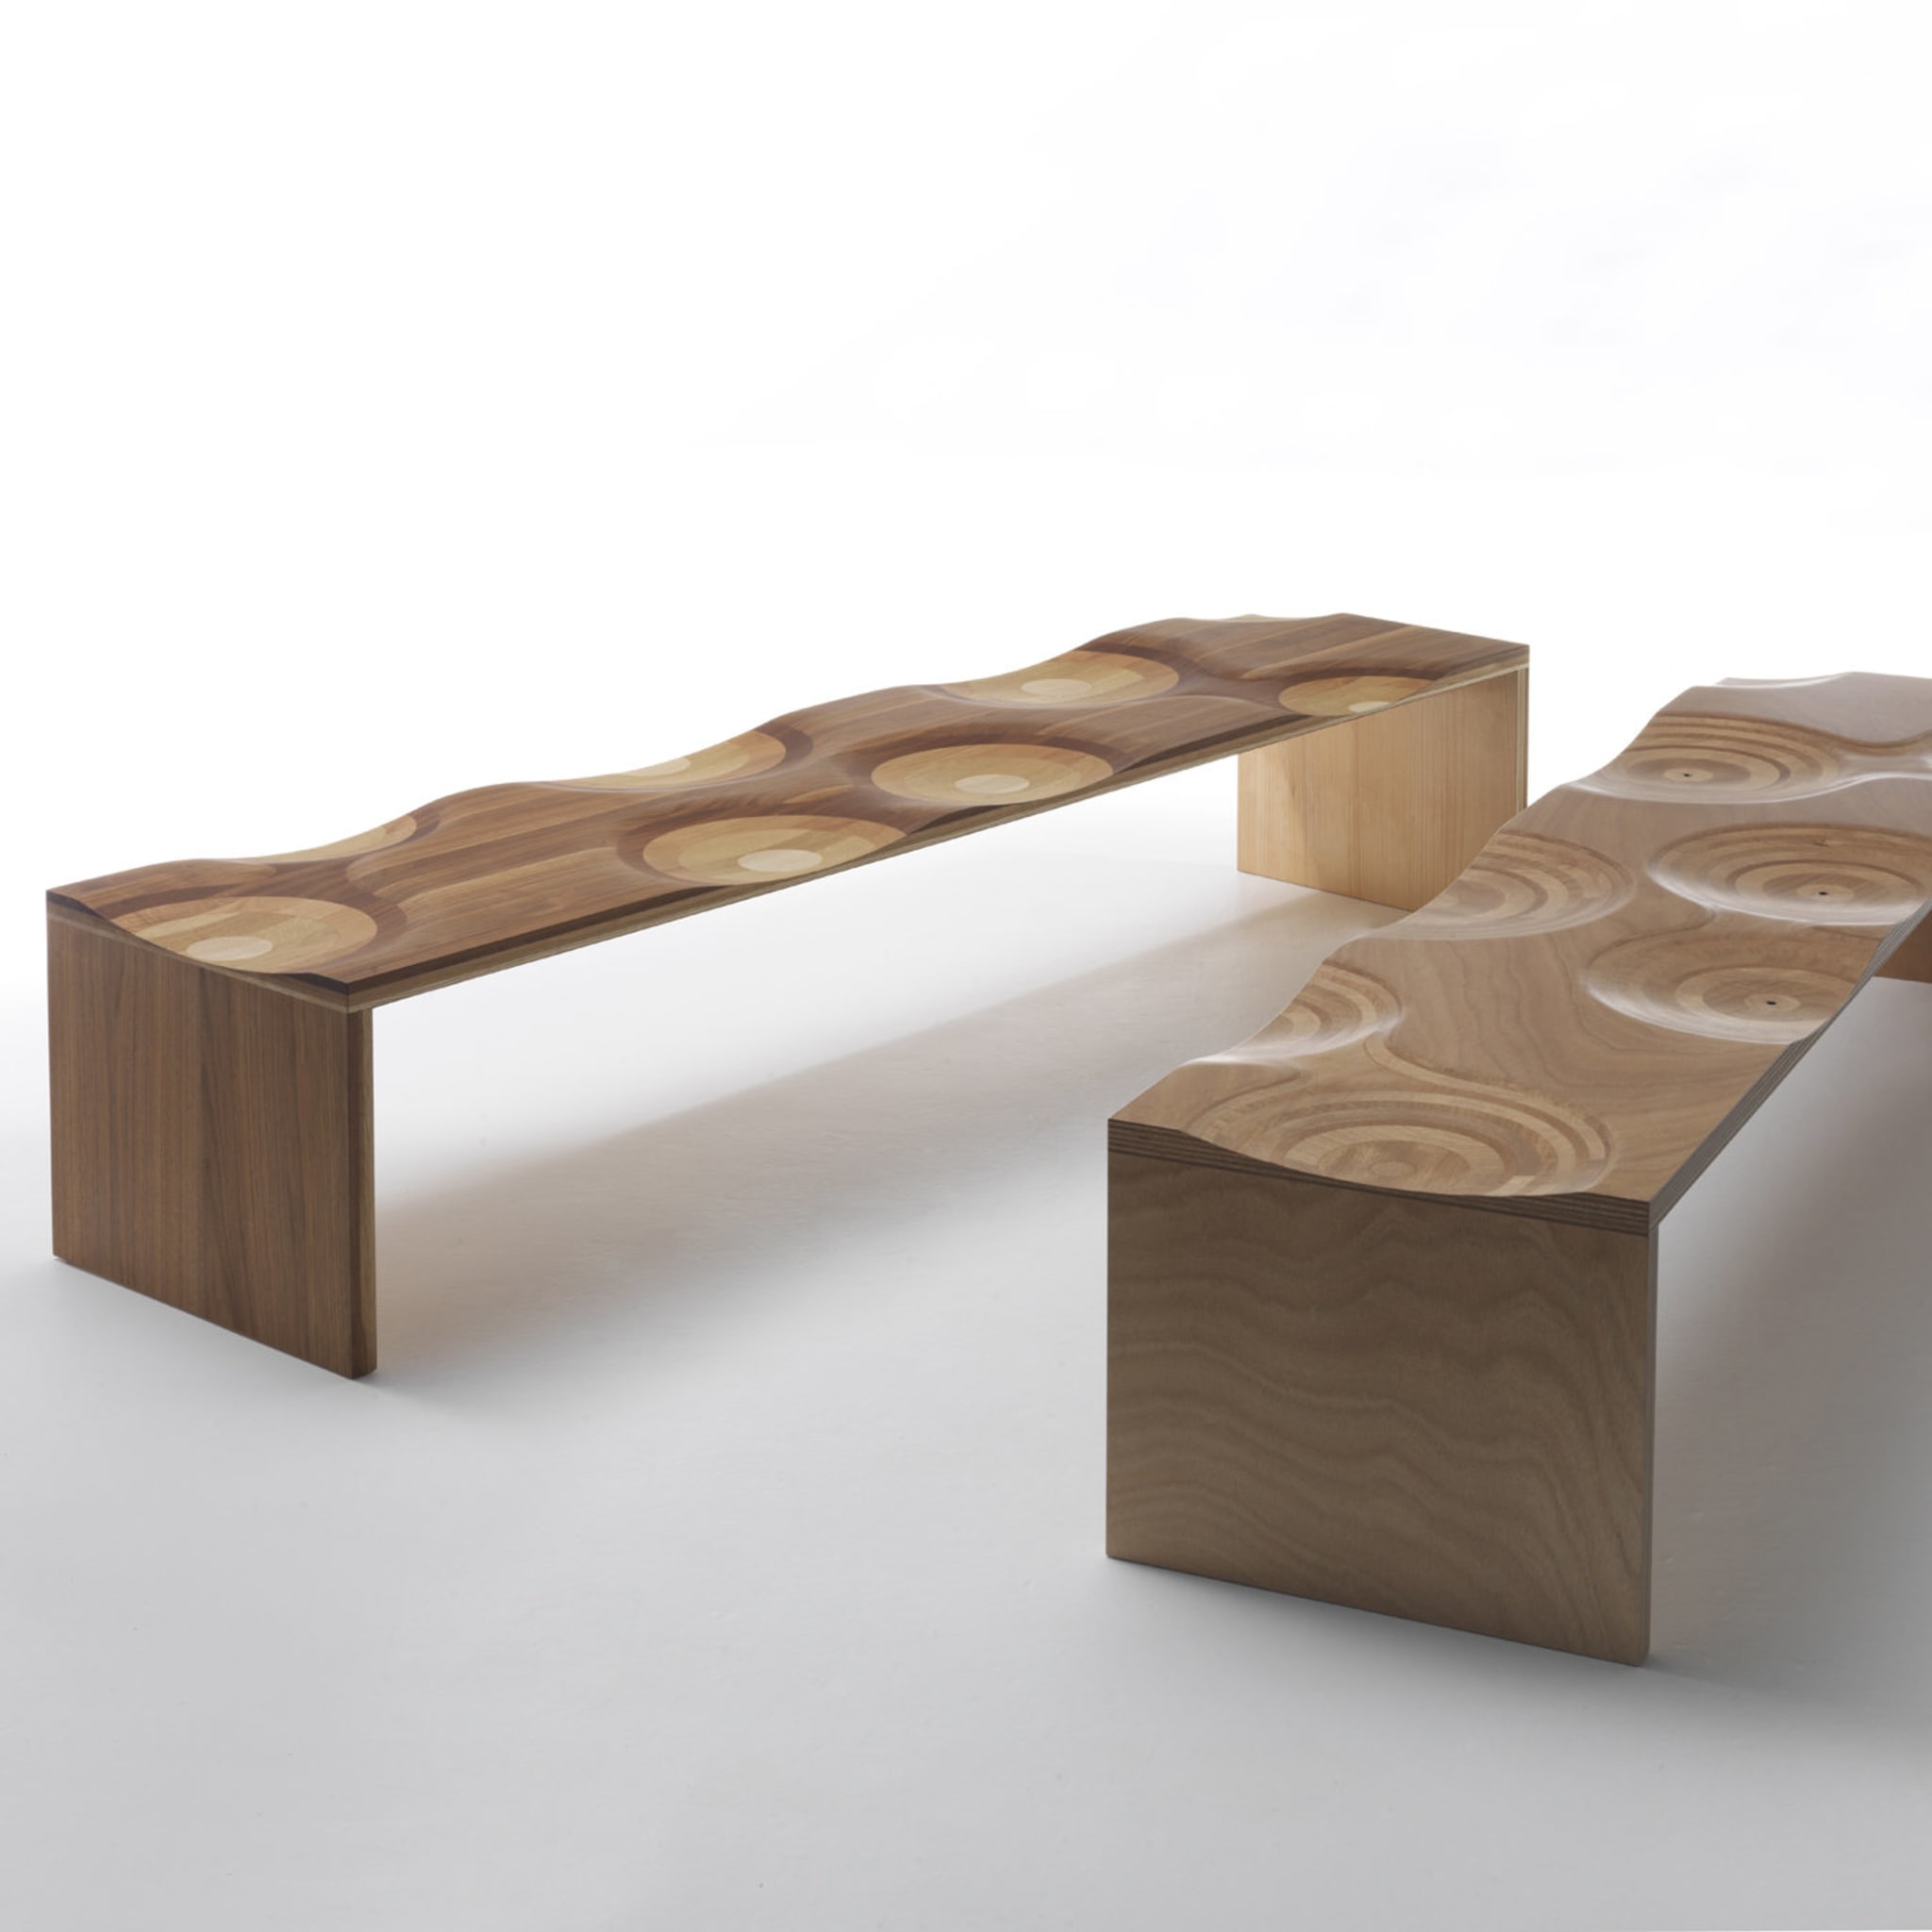 Ripples Bench by Toyo Ito - Alternative view 1